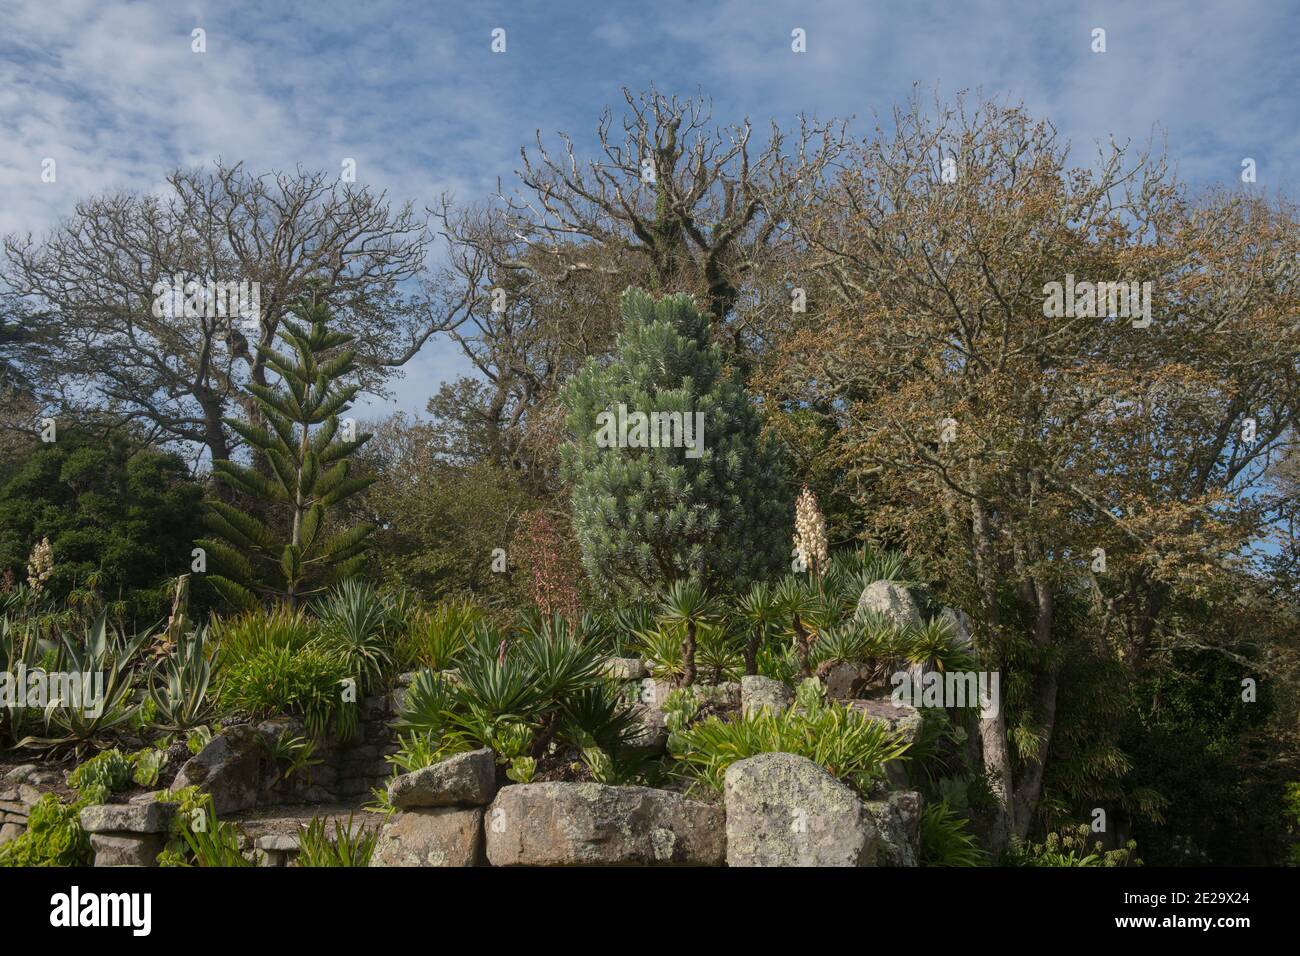 Green Foliage of an Evergreen South African Pine or Silver Tree (Leucadendron argenteum) Growing in a Garden on the Island of Tresco in the Isles of S Stock Photo